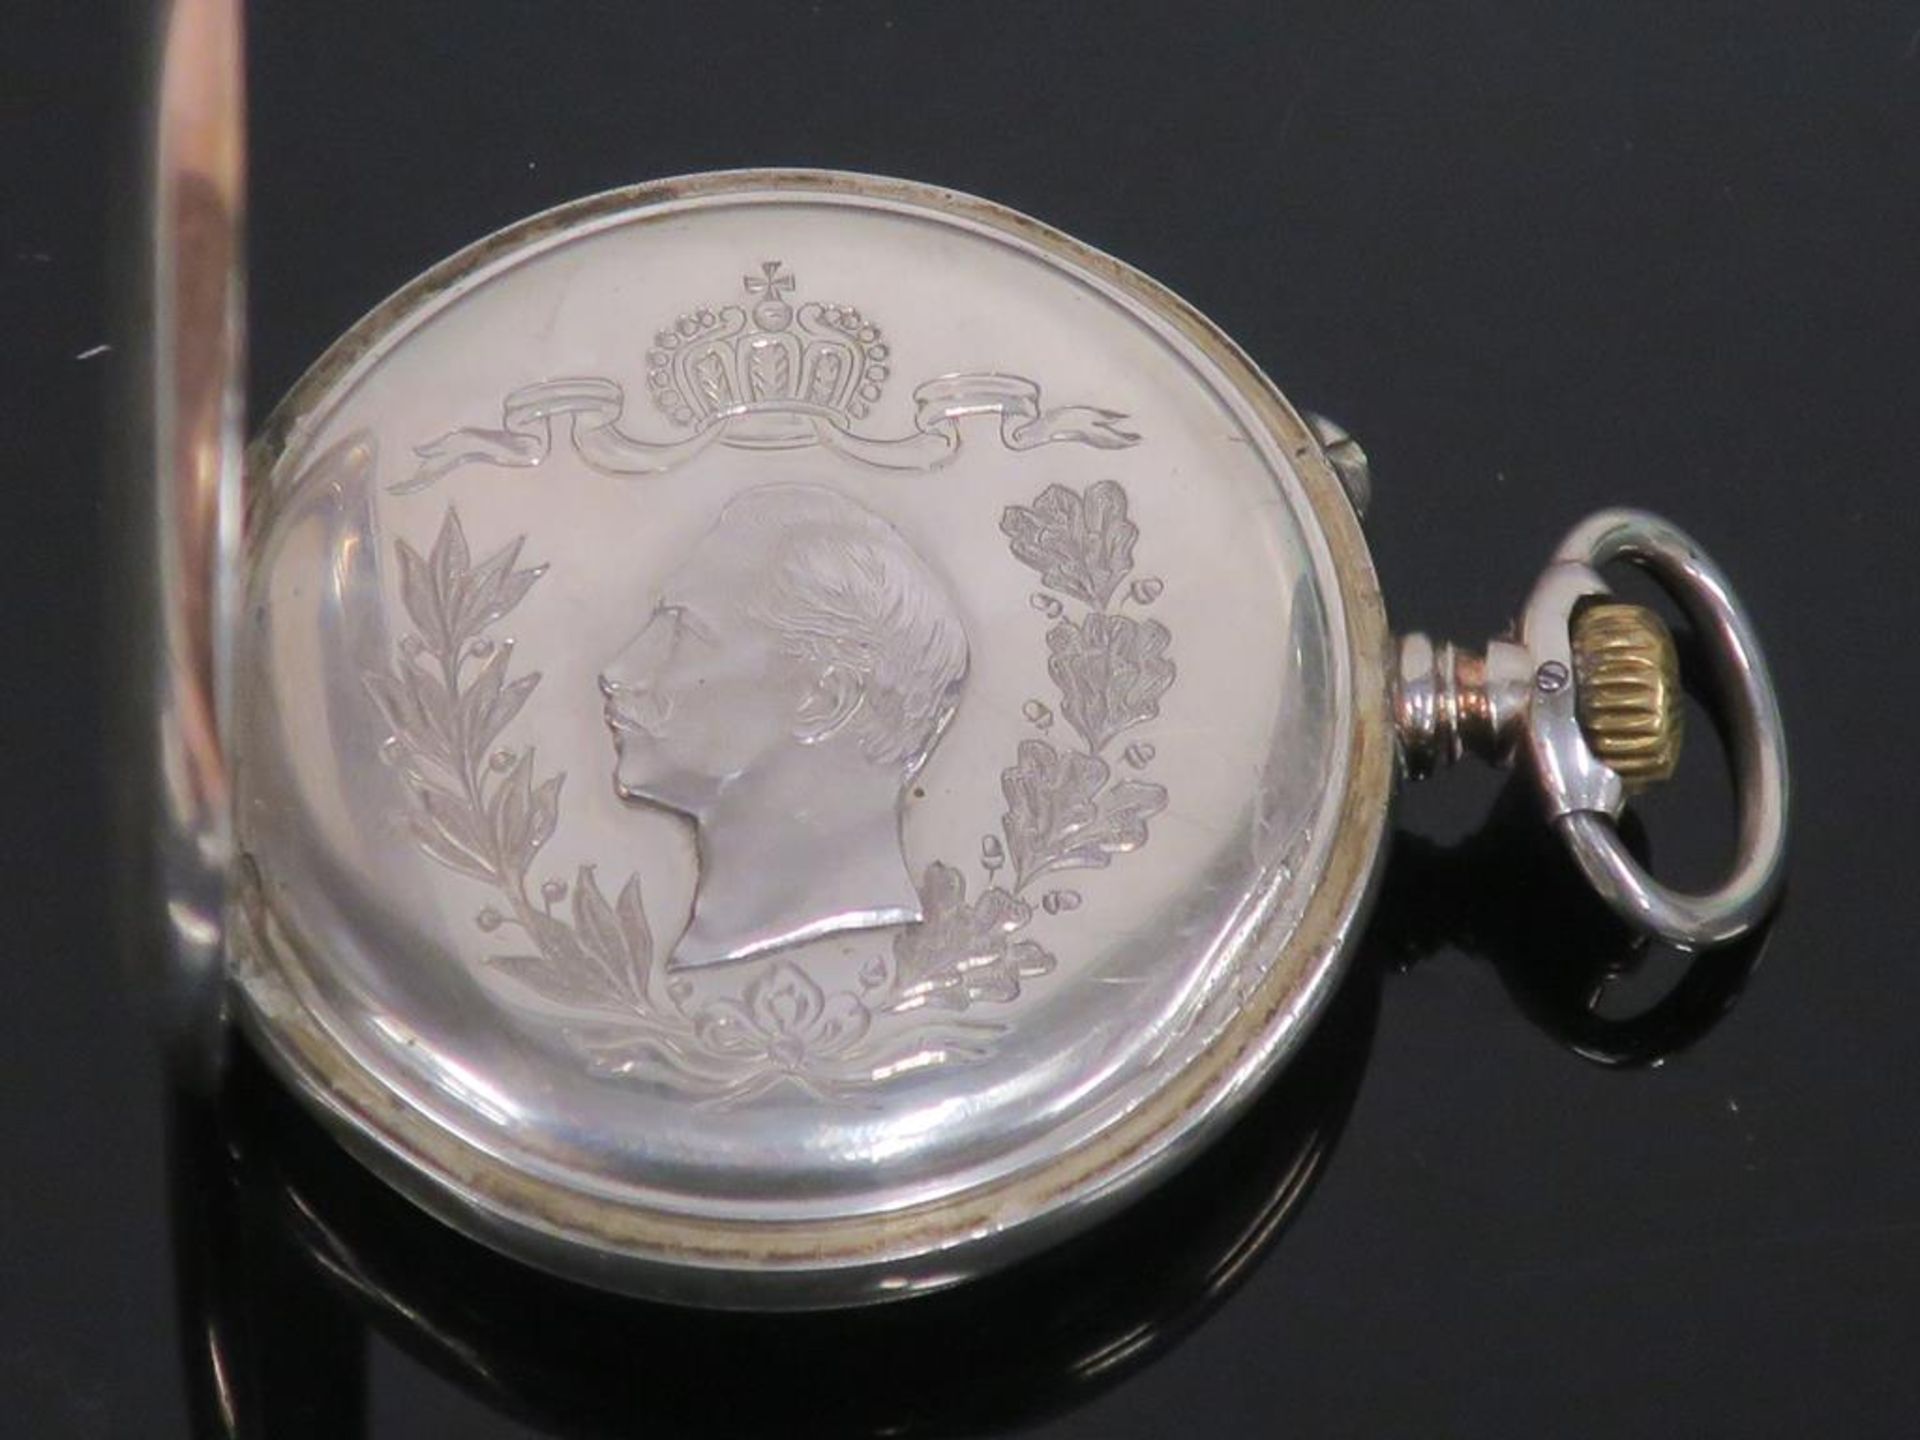 A Fine Silver Pocket Watch Hallmarked with 0.800, 1327426, a Grouse, a German Crescent Moon and - Image 4 of 7